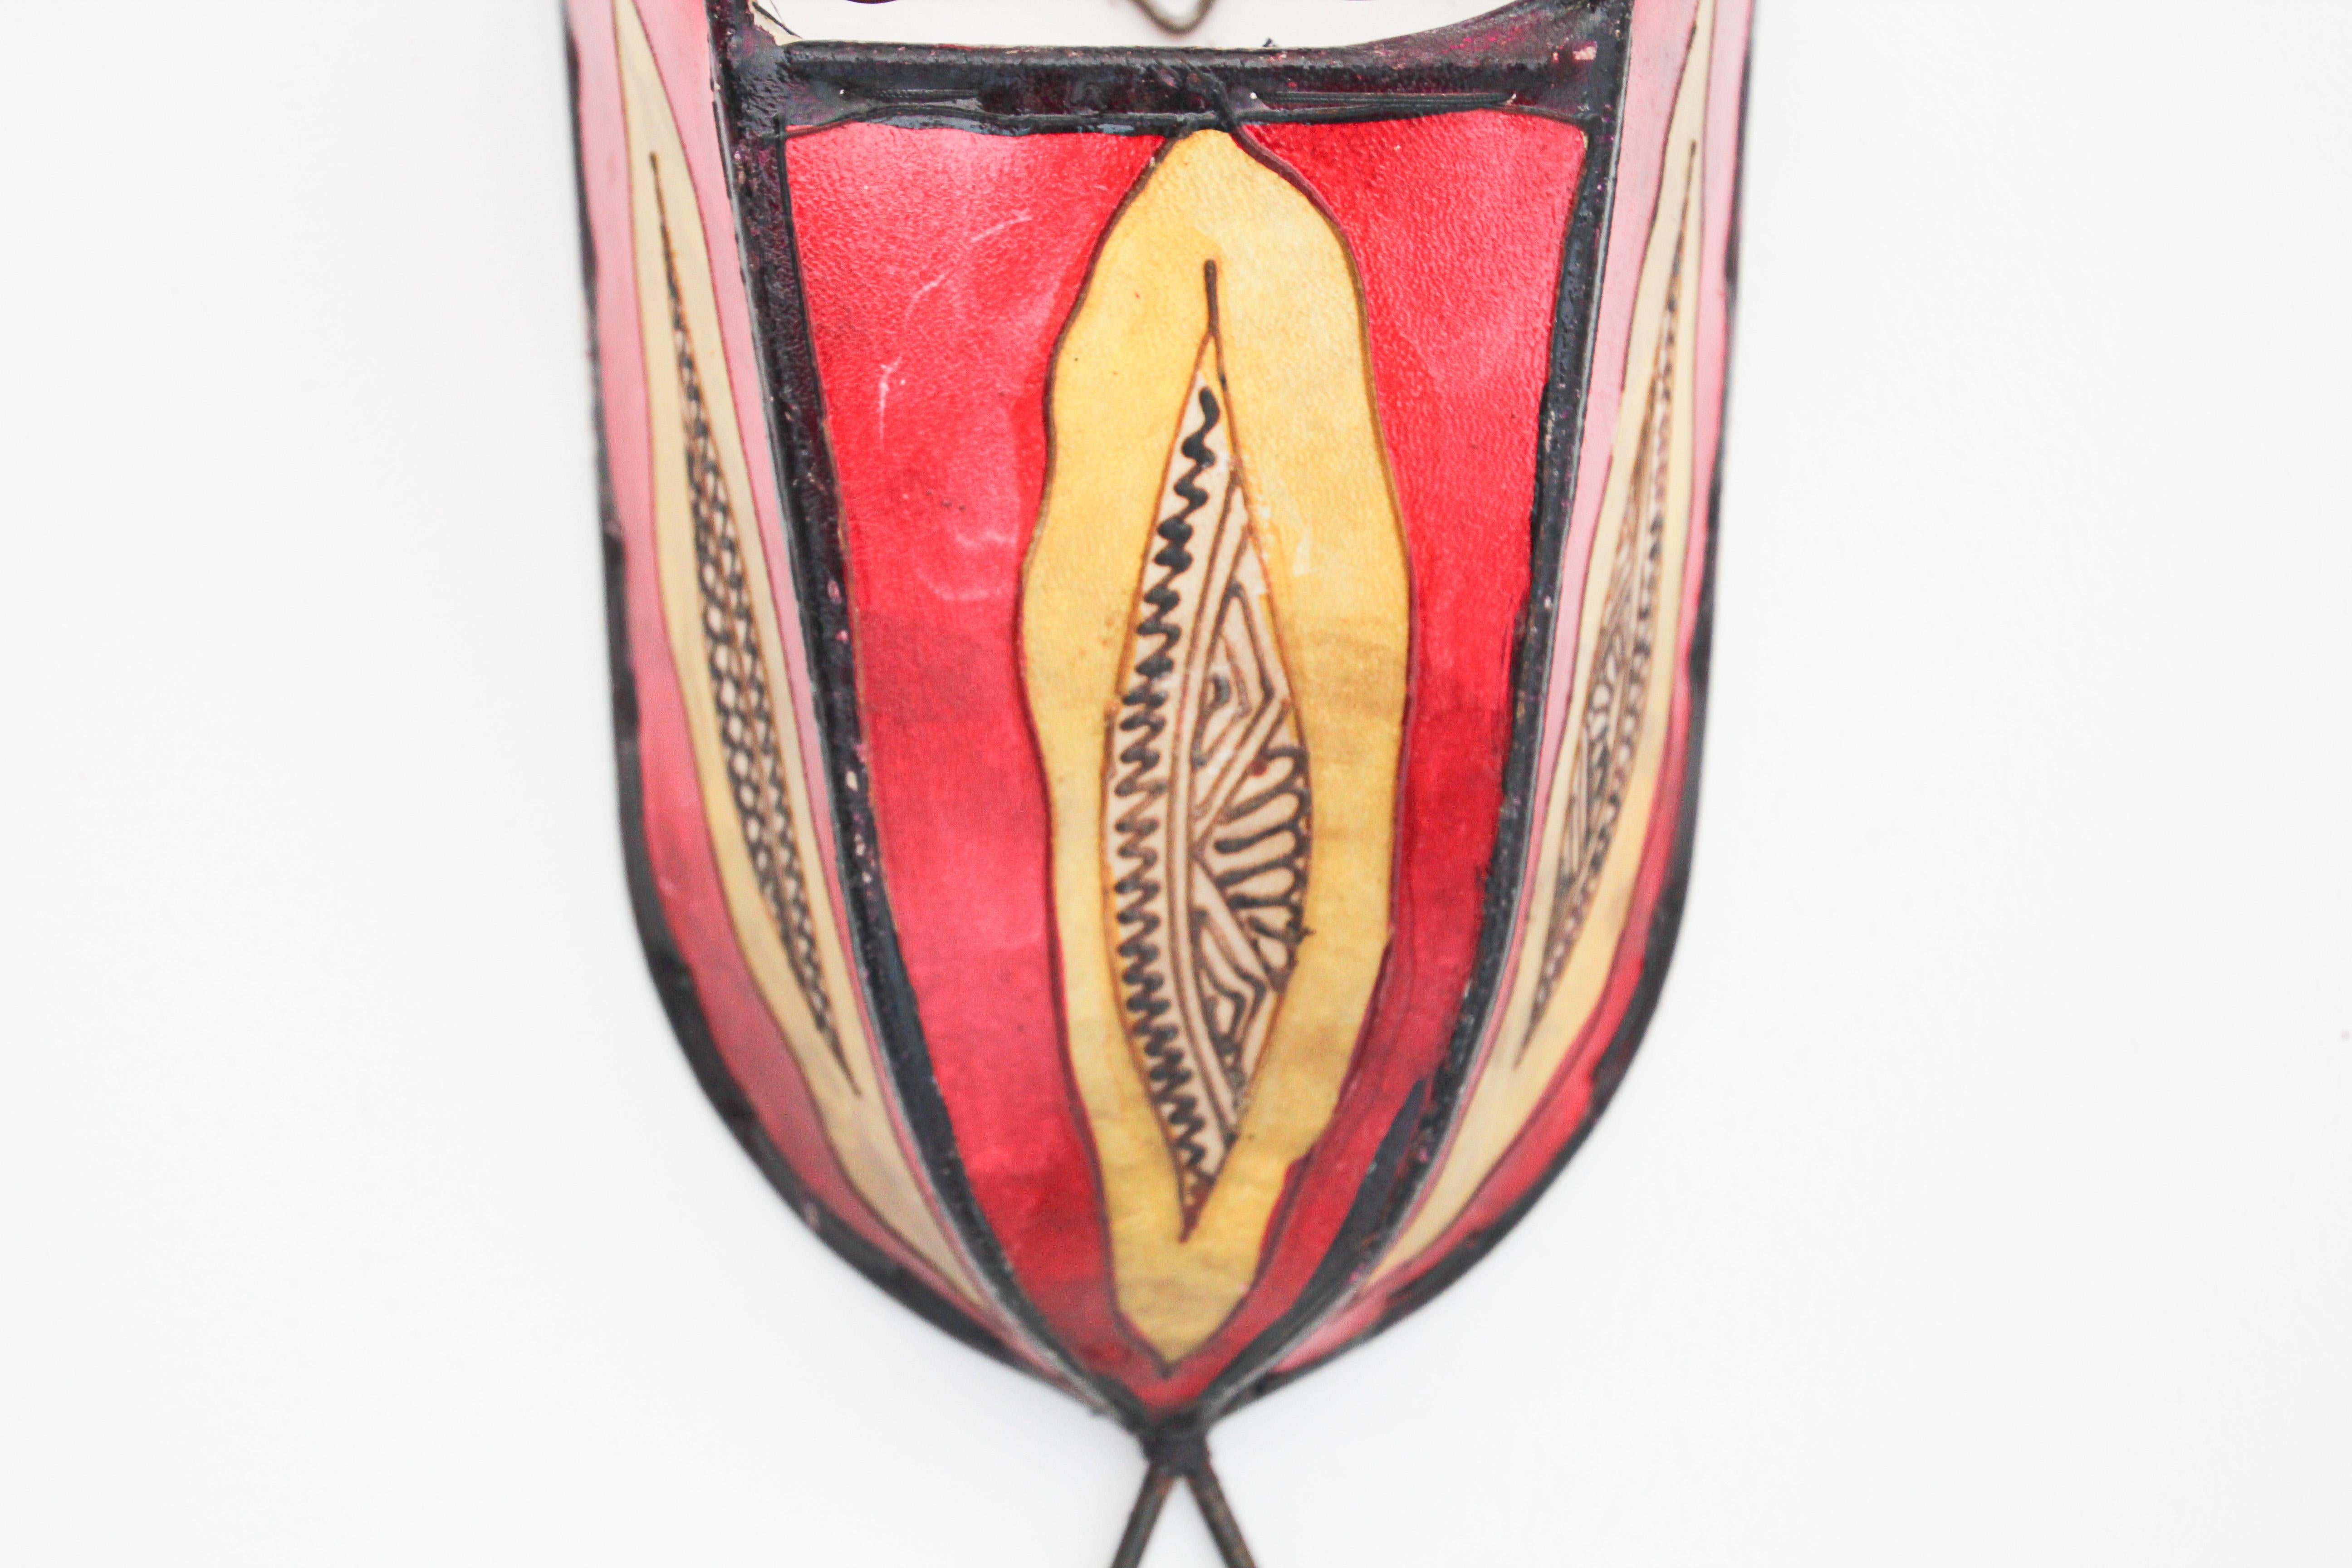 African tribal art parchment wall shade sconce featuring a large curved hide form stitched on iron and hand painted surface.
These Moroccan art pieces could be used as wall lamp shade.
Iron frame covered with hide parchment which has been hand